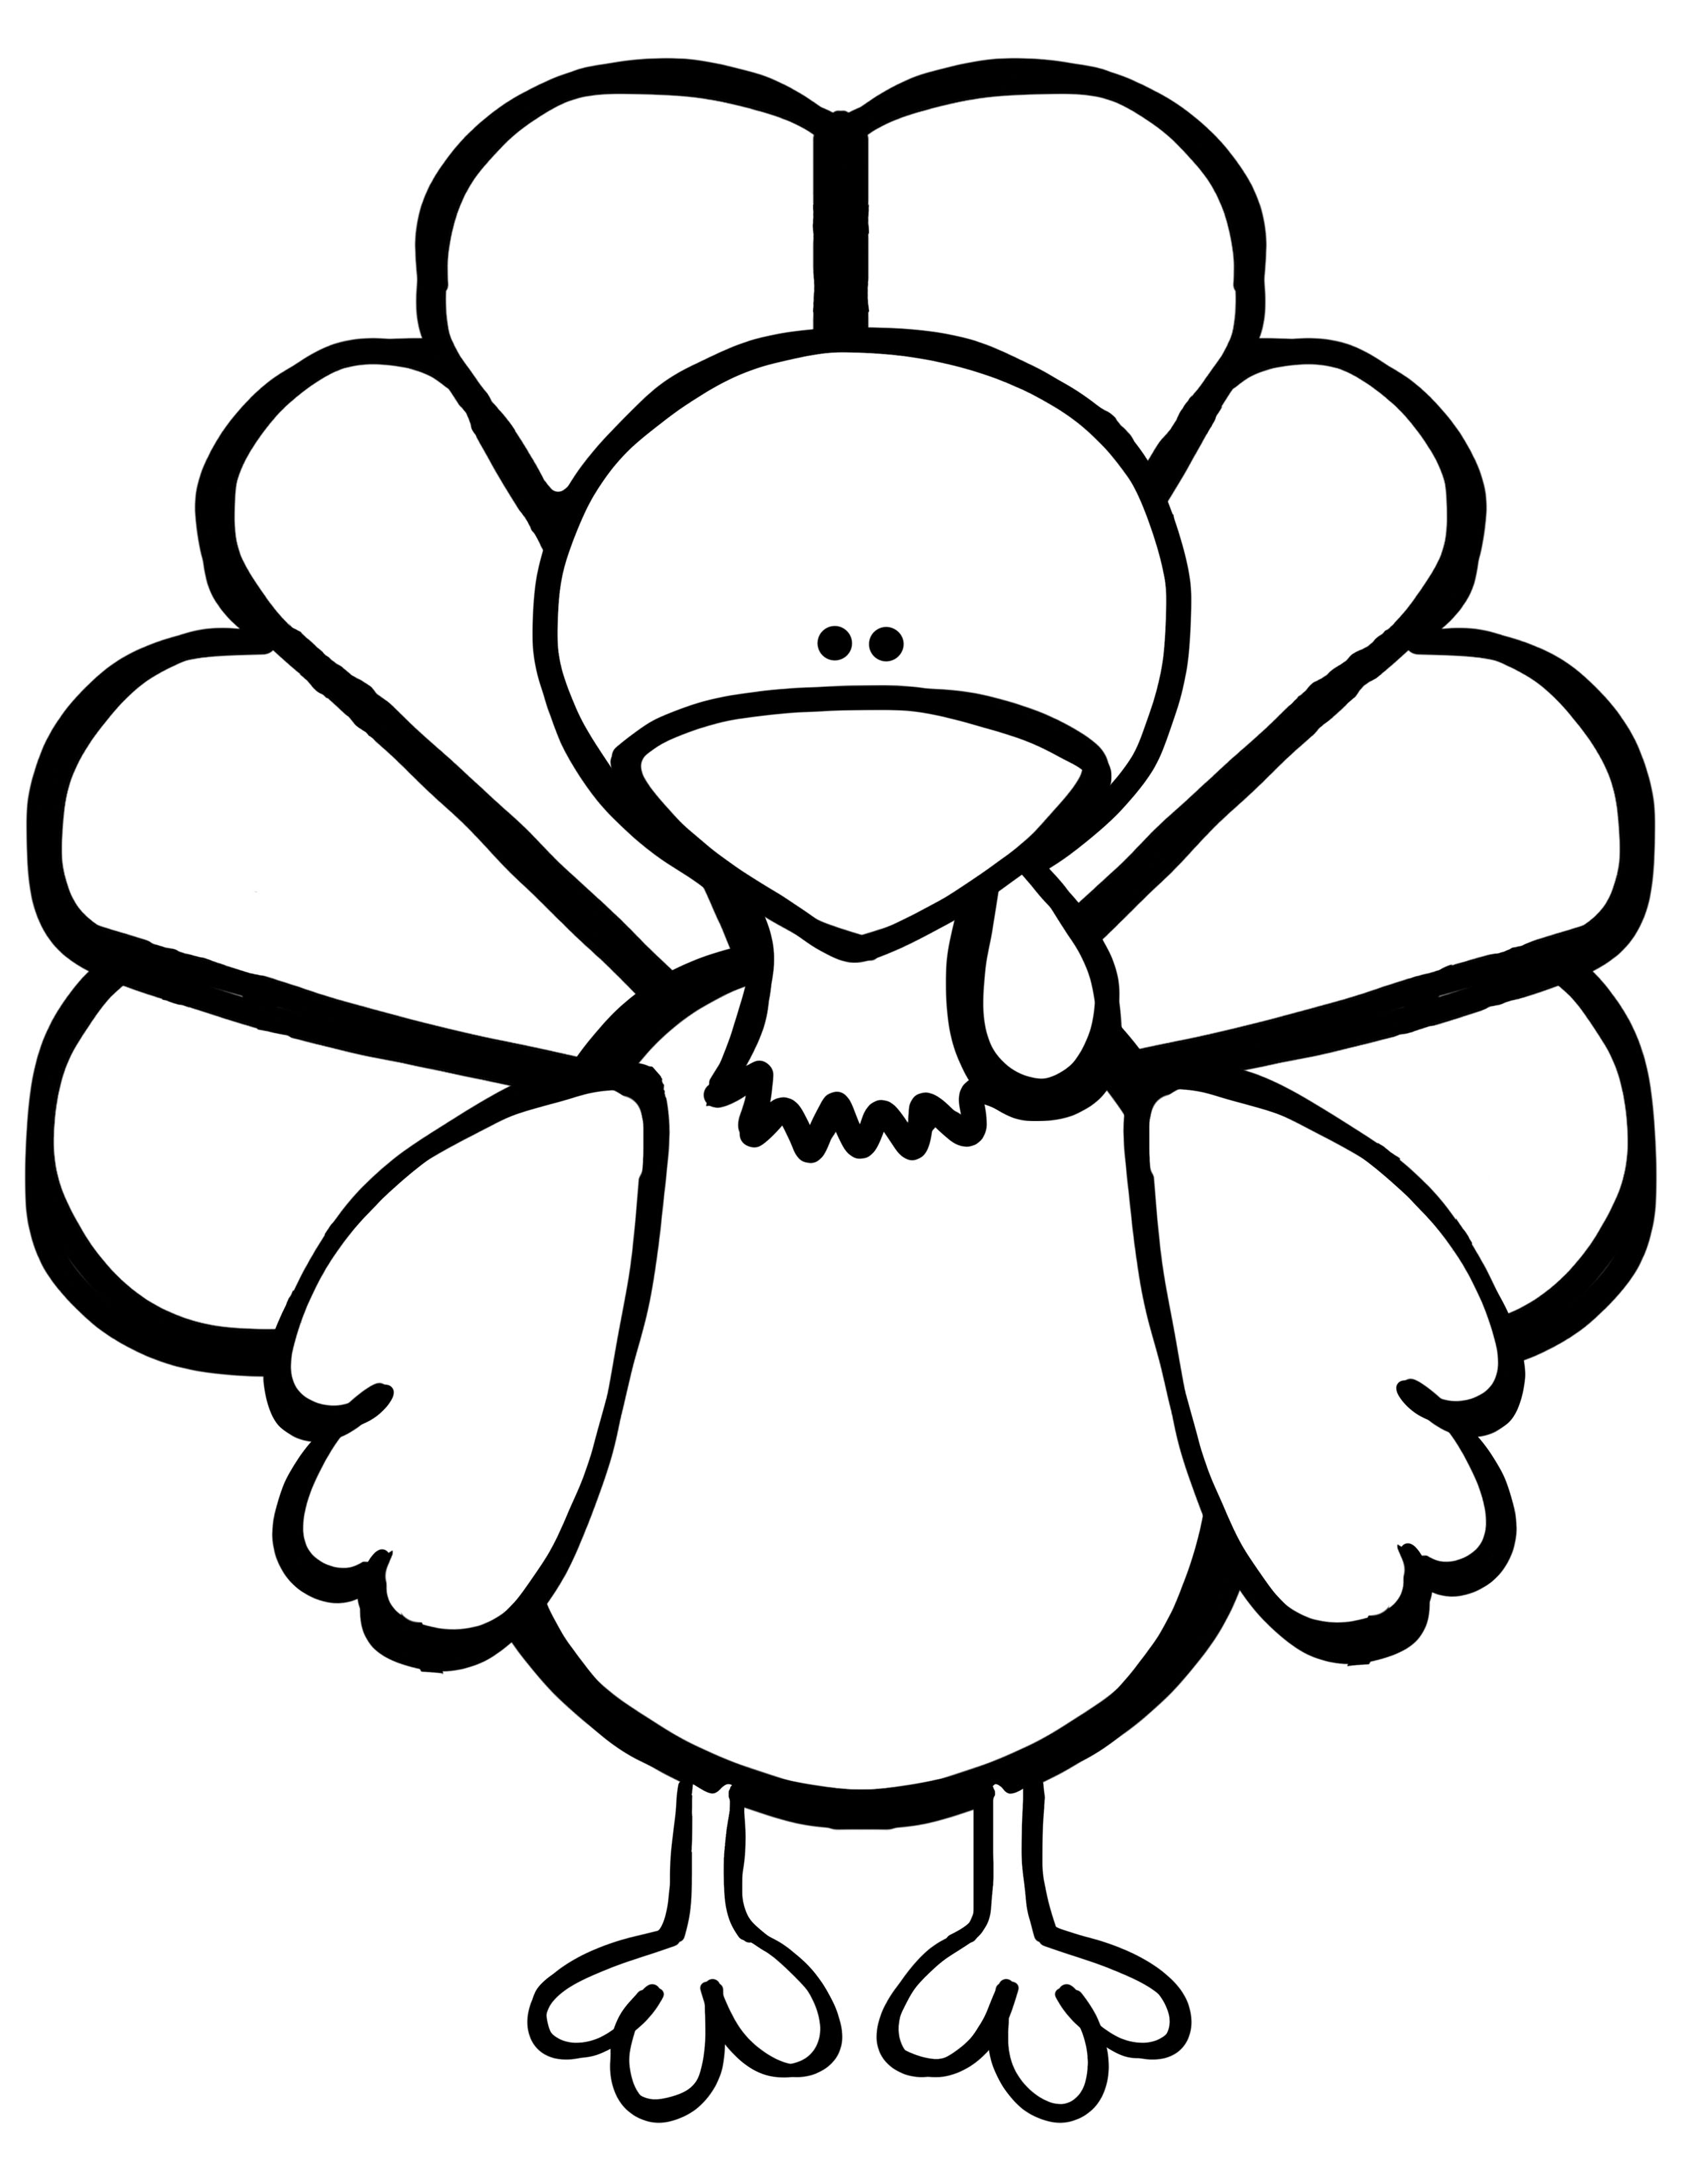 K 5 Disguise The Turkey - Lessons - Blendspace